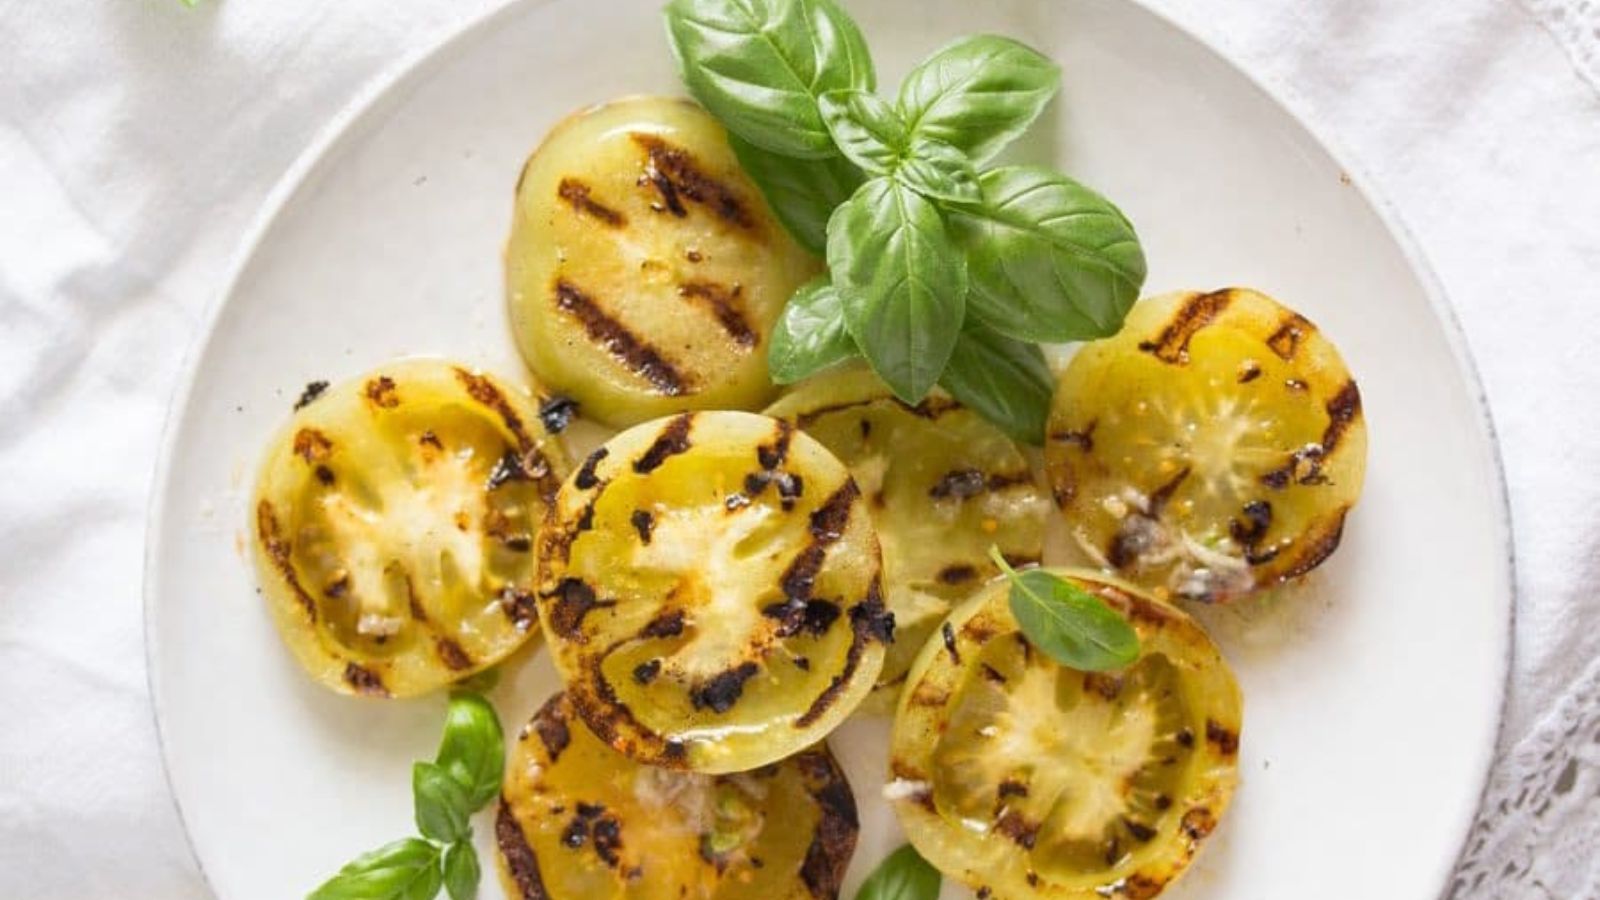 Grilled green tomatoes on a white plate.